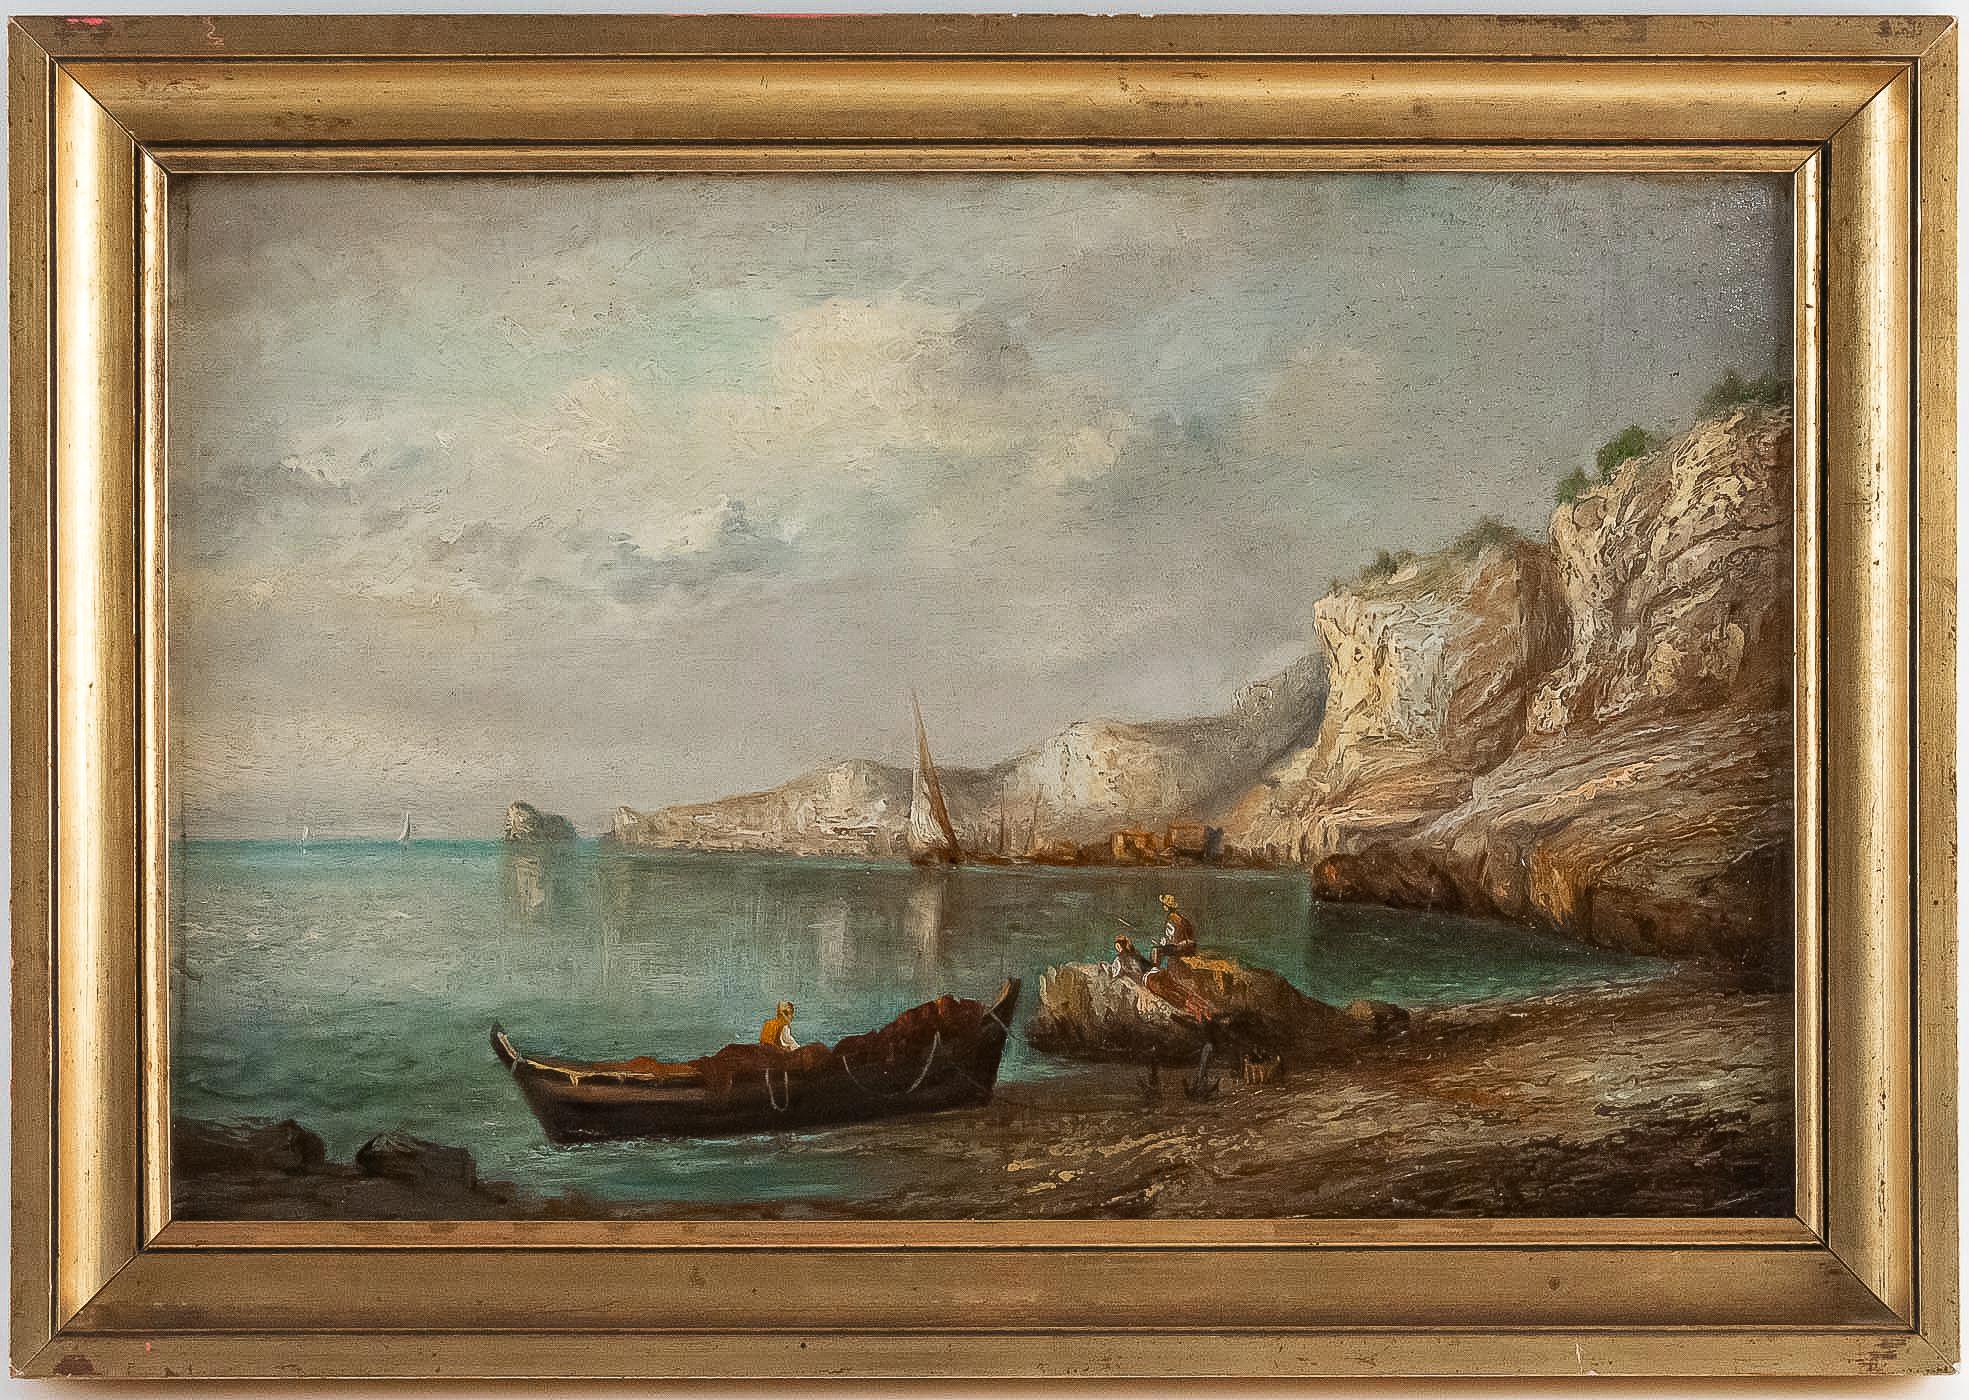 An excellent oil on panel depicting a French fishing scene of the 1850s. 
Much quality on this small painting.

Our painting in fine original condition signed on a lower right.

Lapierre Emile, Oil on walnut panel French Marine Landscape, circa